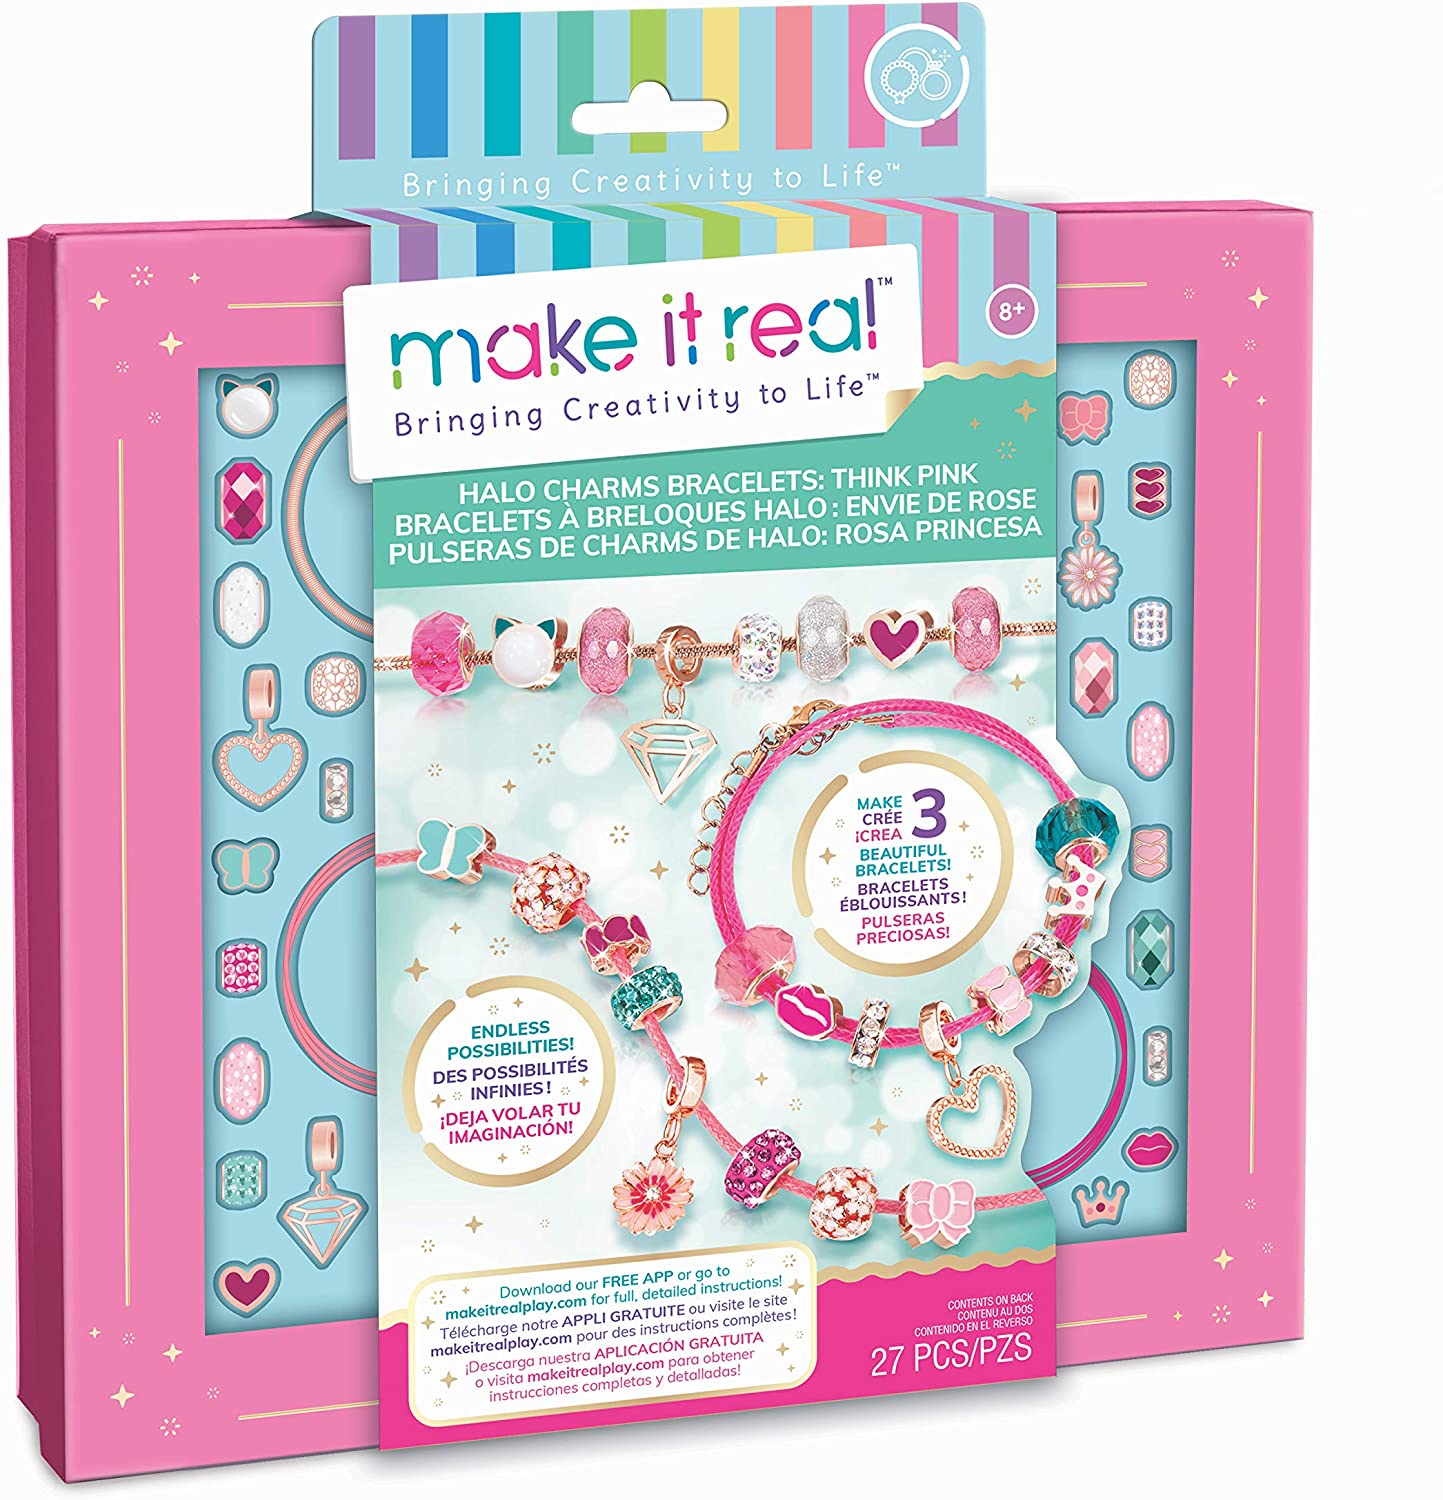 Make It Real Jewelry Making Sets for Children, Multi-Colored